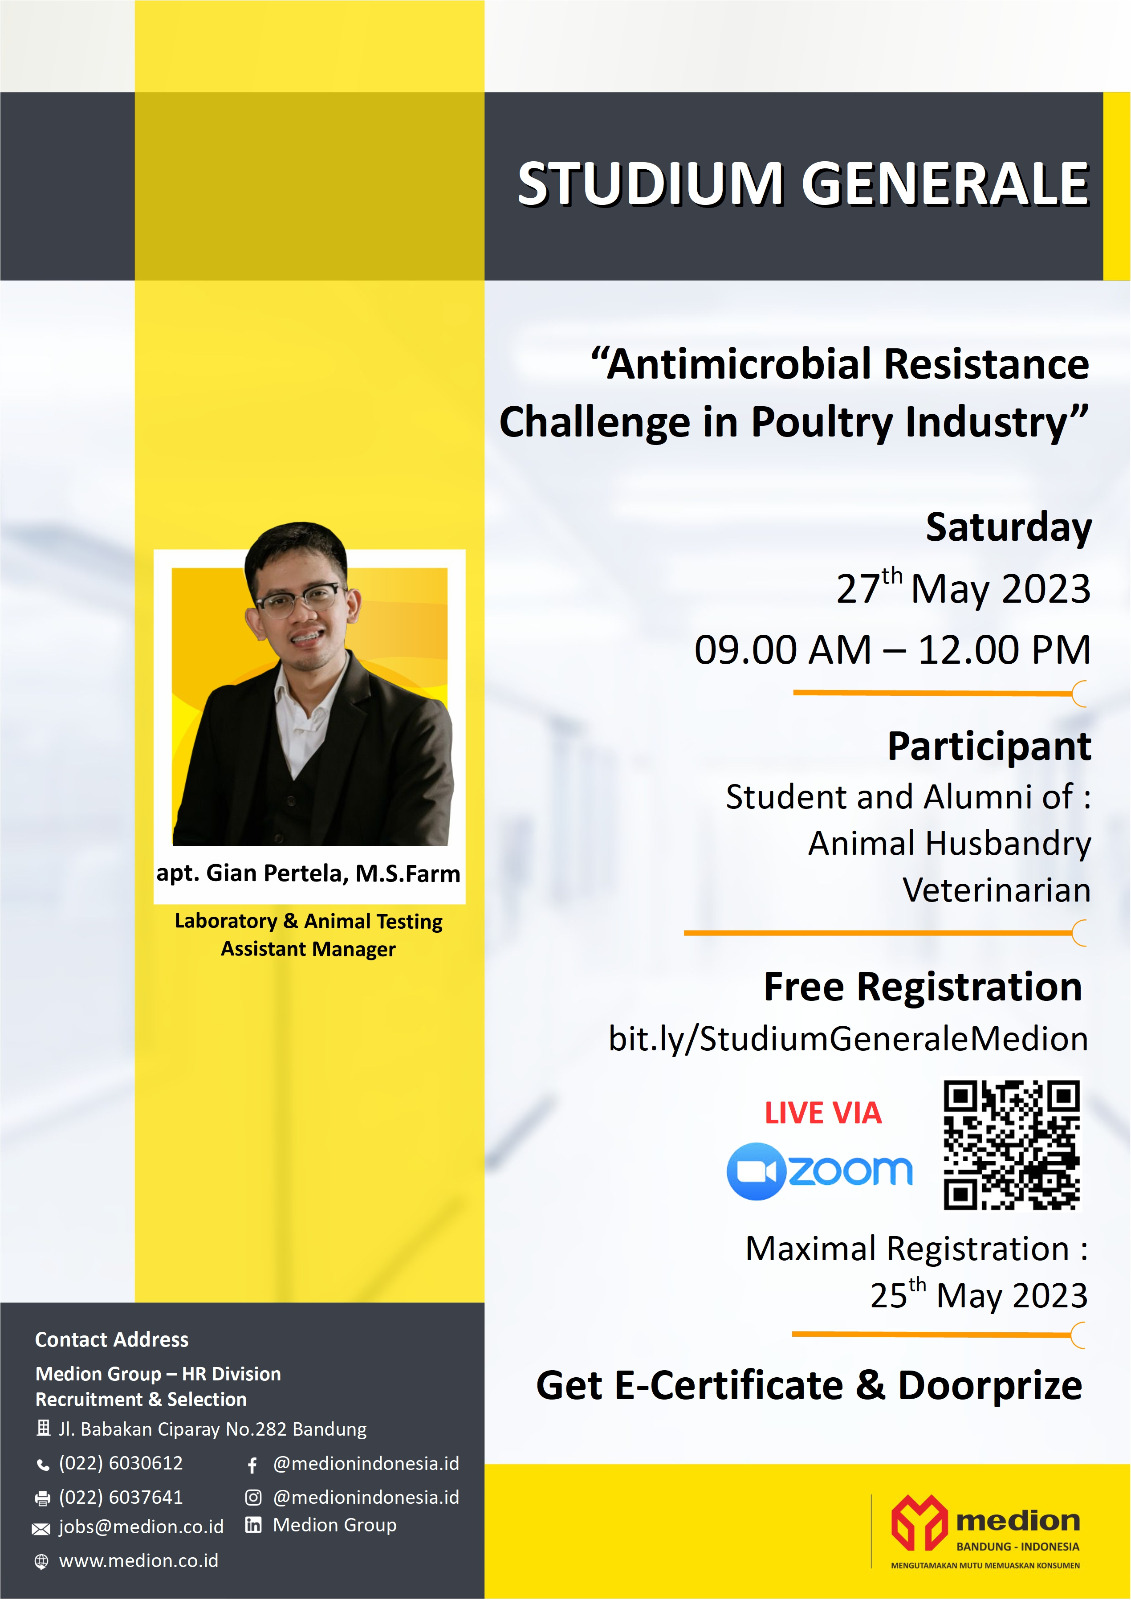 Studium Generale Medion “Antimicrobial Resistance Challenge in Poultry Industry”